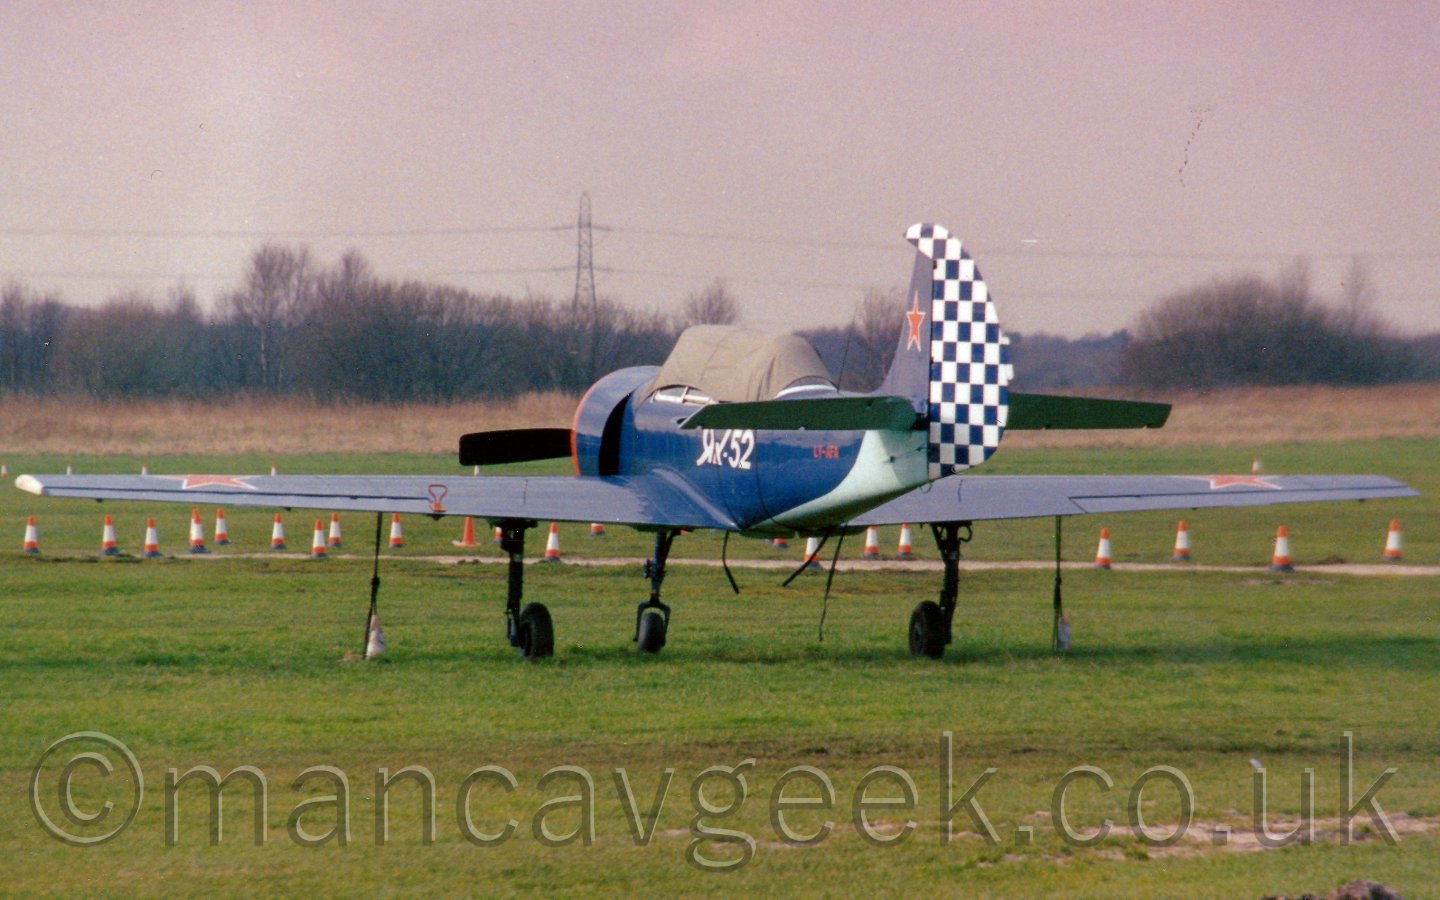 Rear view of a single engined light aircraft with a checkerboard tail parked facing away from the camera on a grass airfield, with trees lining the horizon under a grey sky.